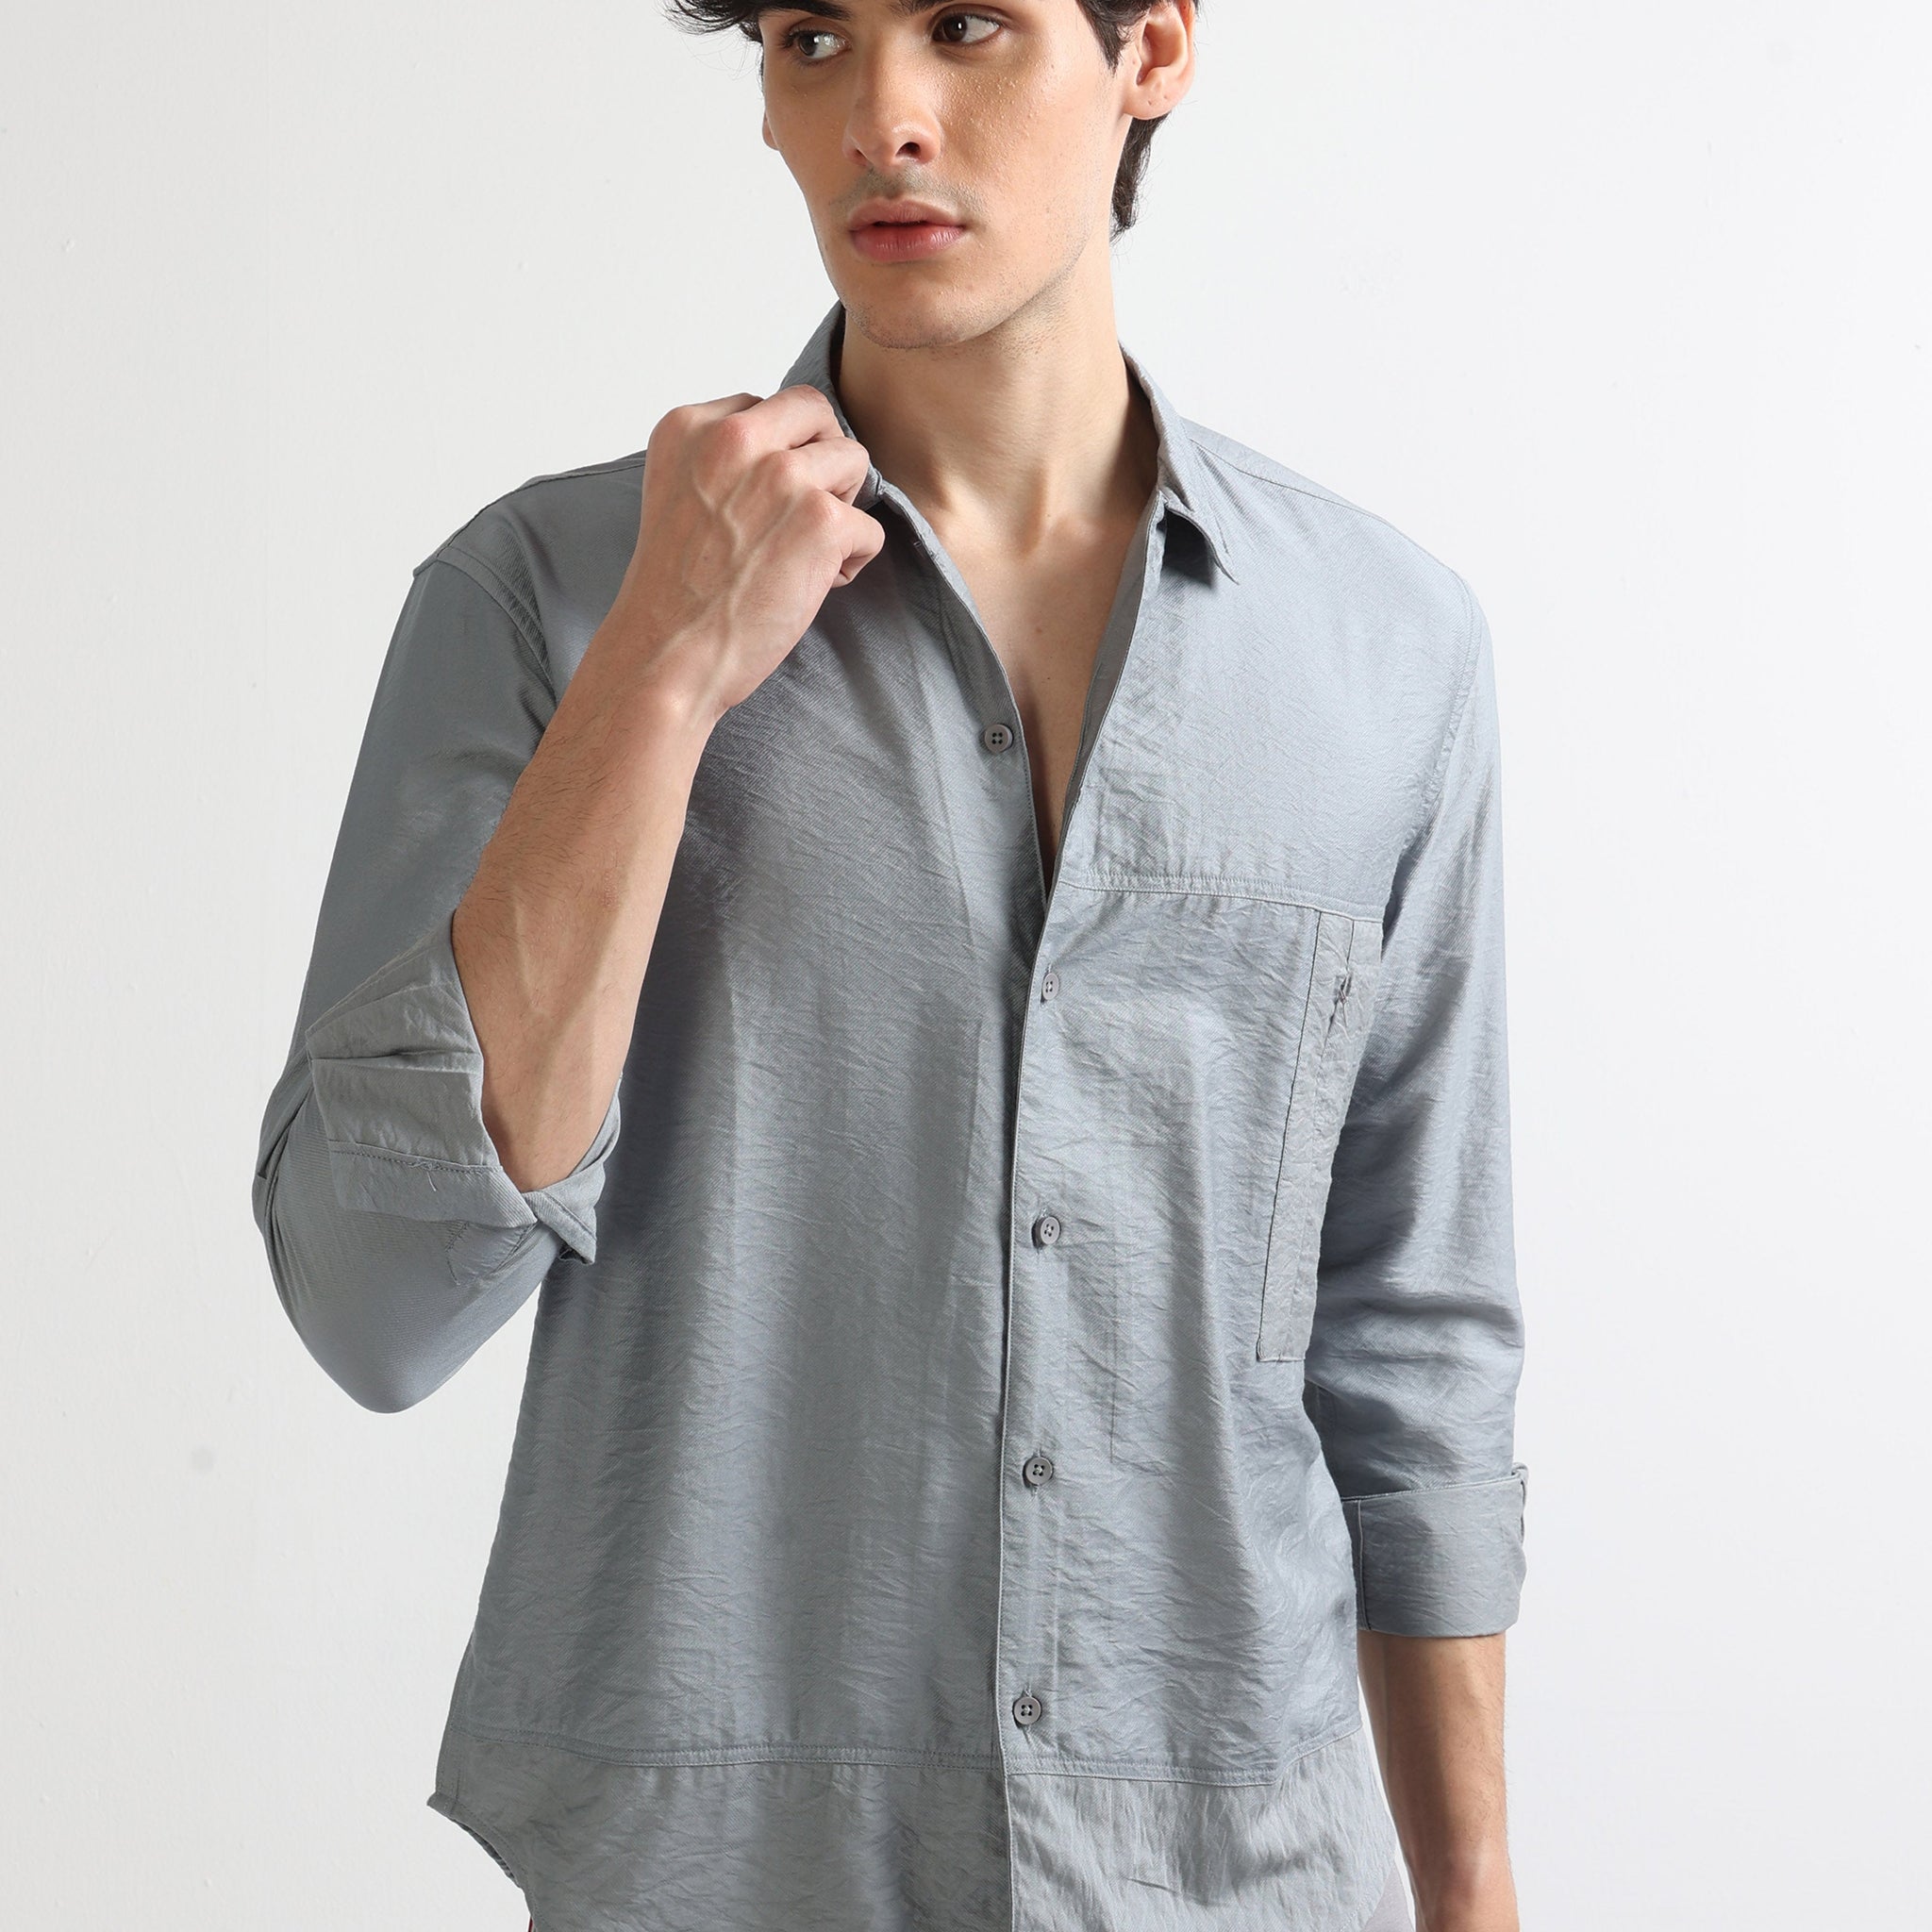 Ash Men's Imported Fabric Solid Crushed Plain Shirt